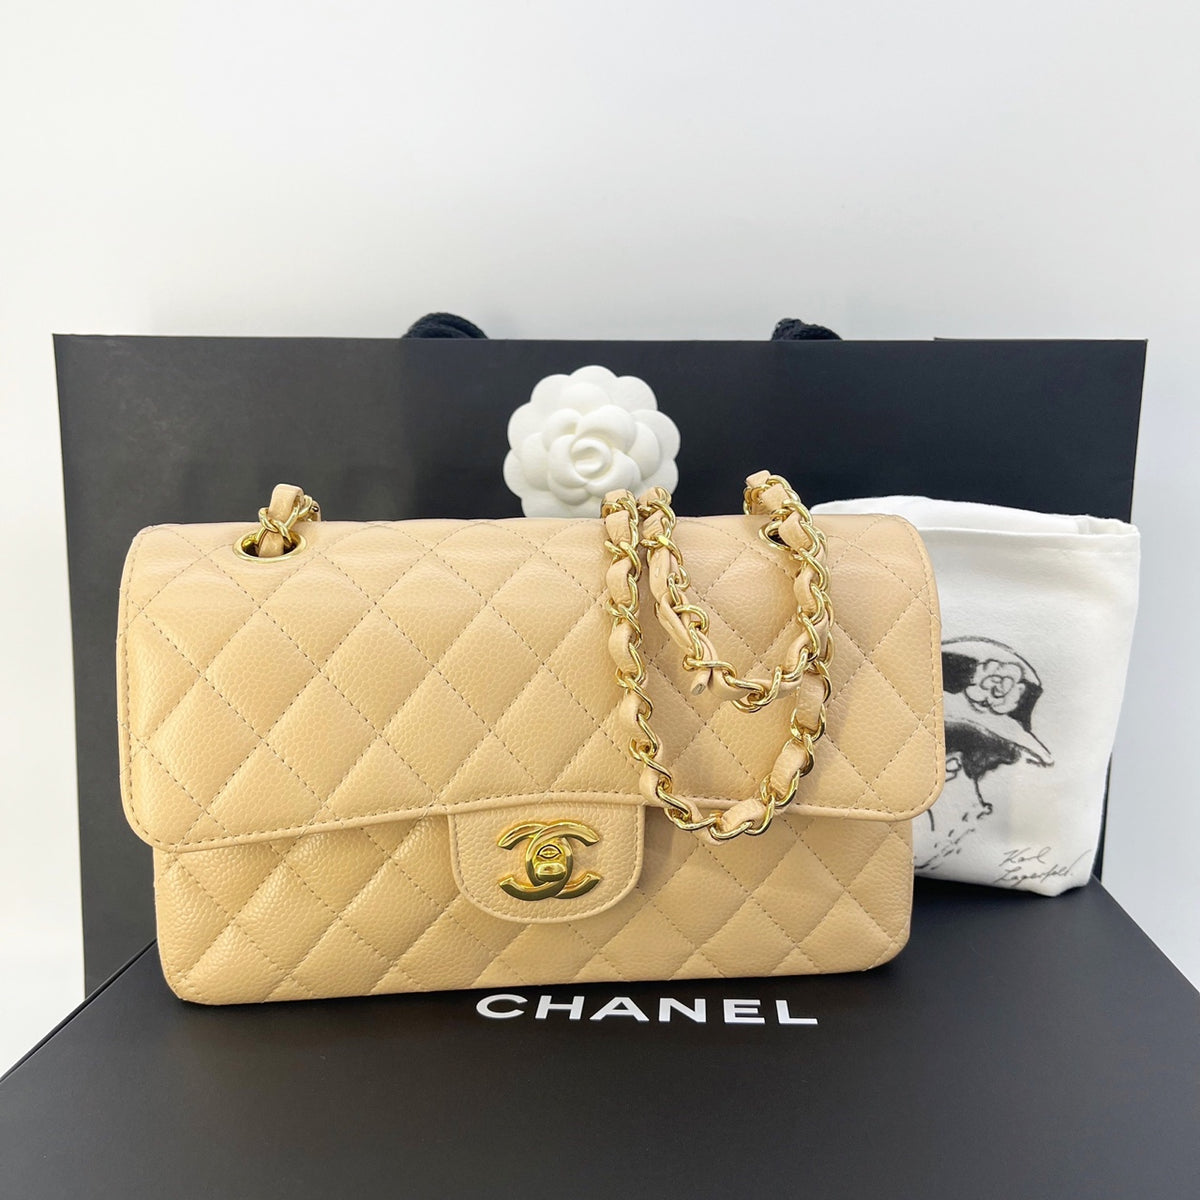 Chanel Beige Quilted Caviar Leather Medium Classic Double Flap Bag Chanel